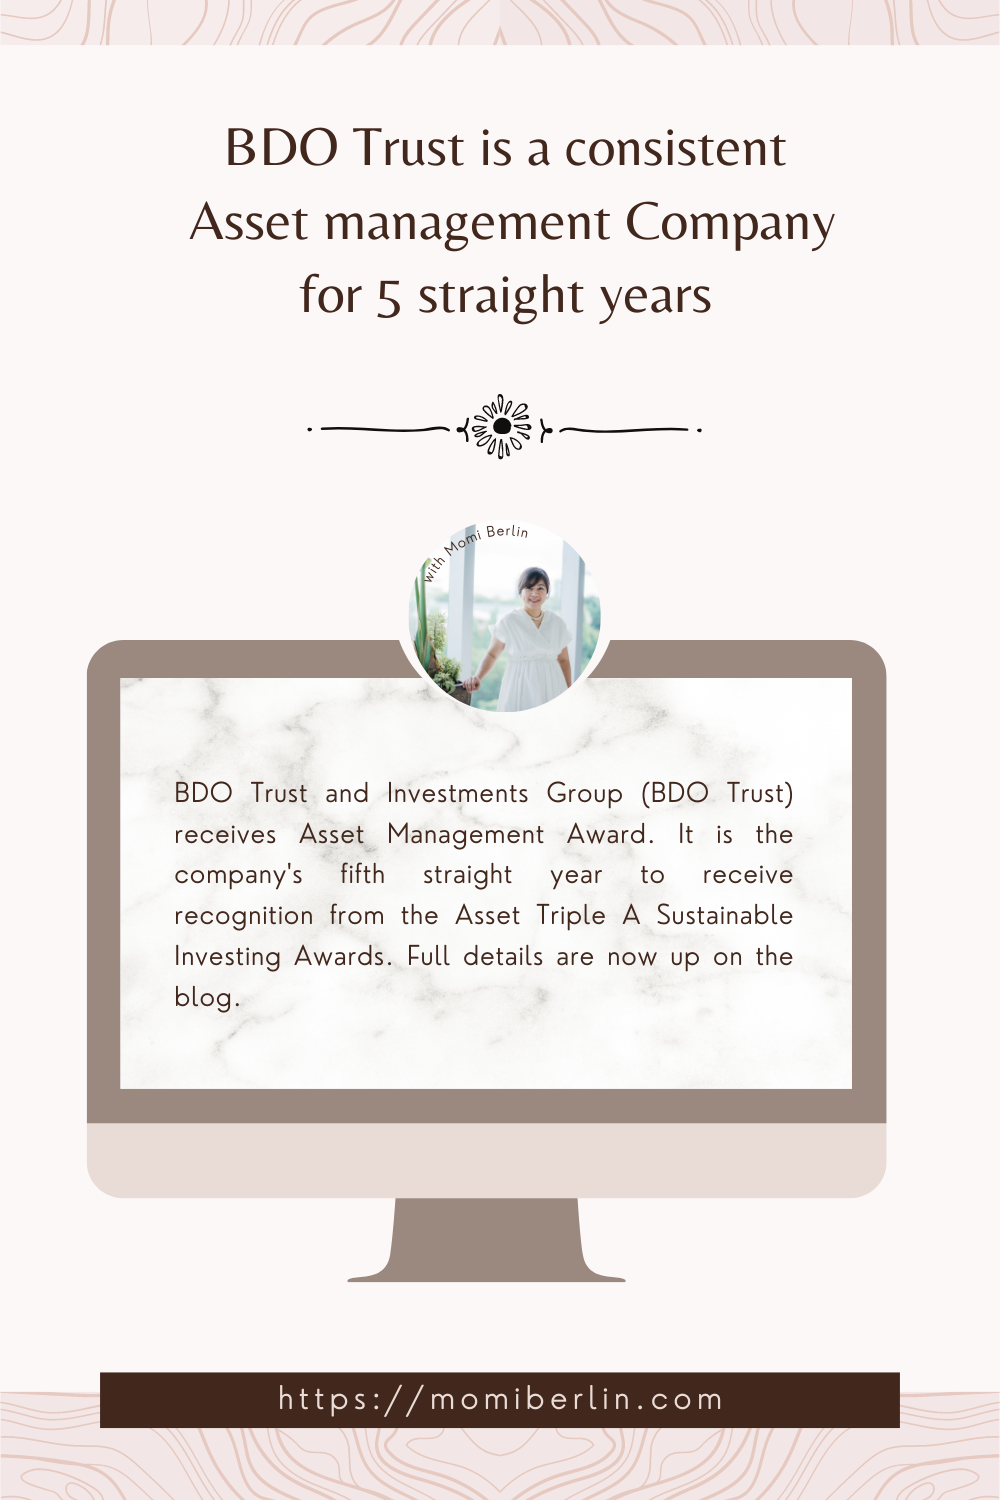 BDO Trust is consistent Asset management Company for 5 straight years